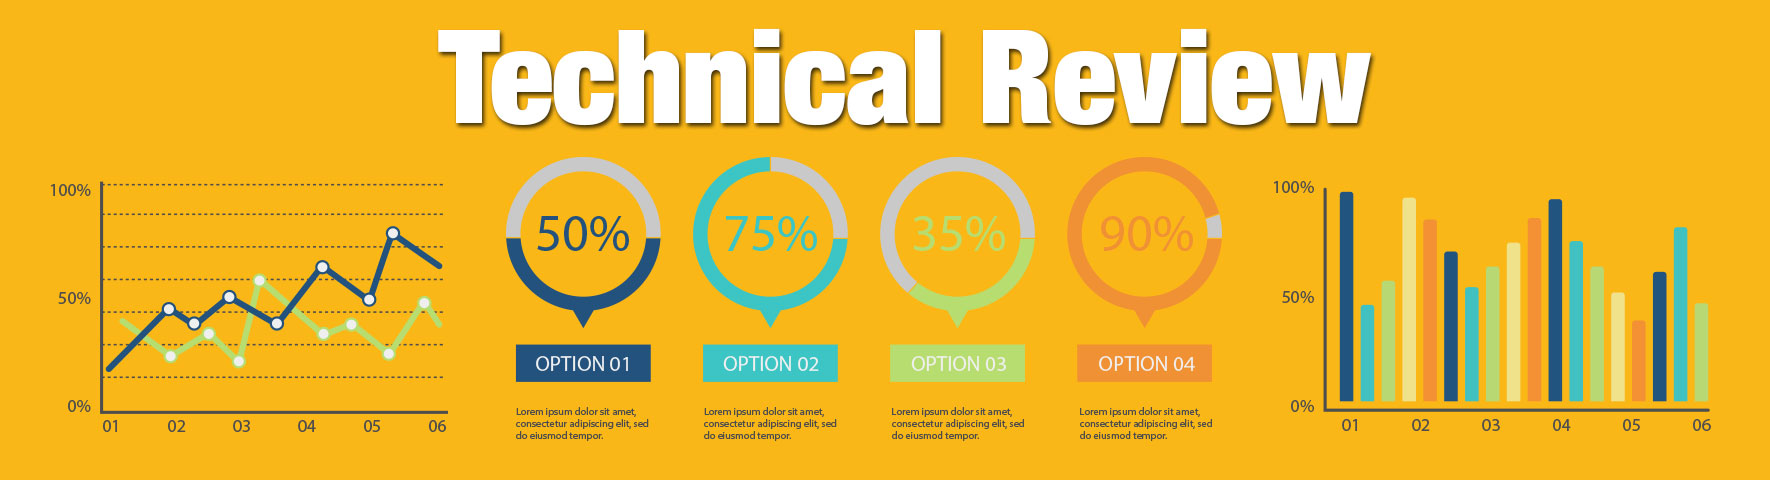 Technical Review Infographic